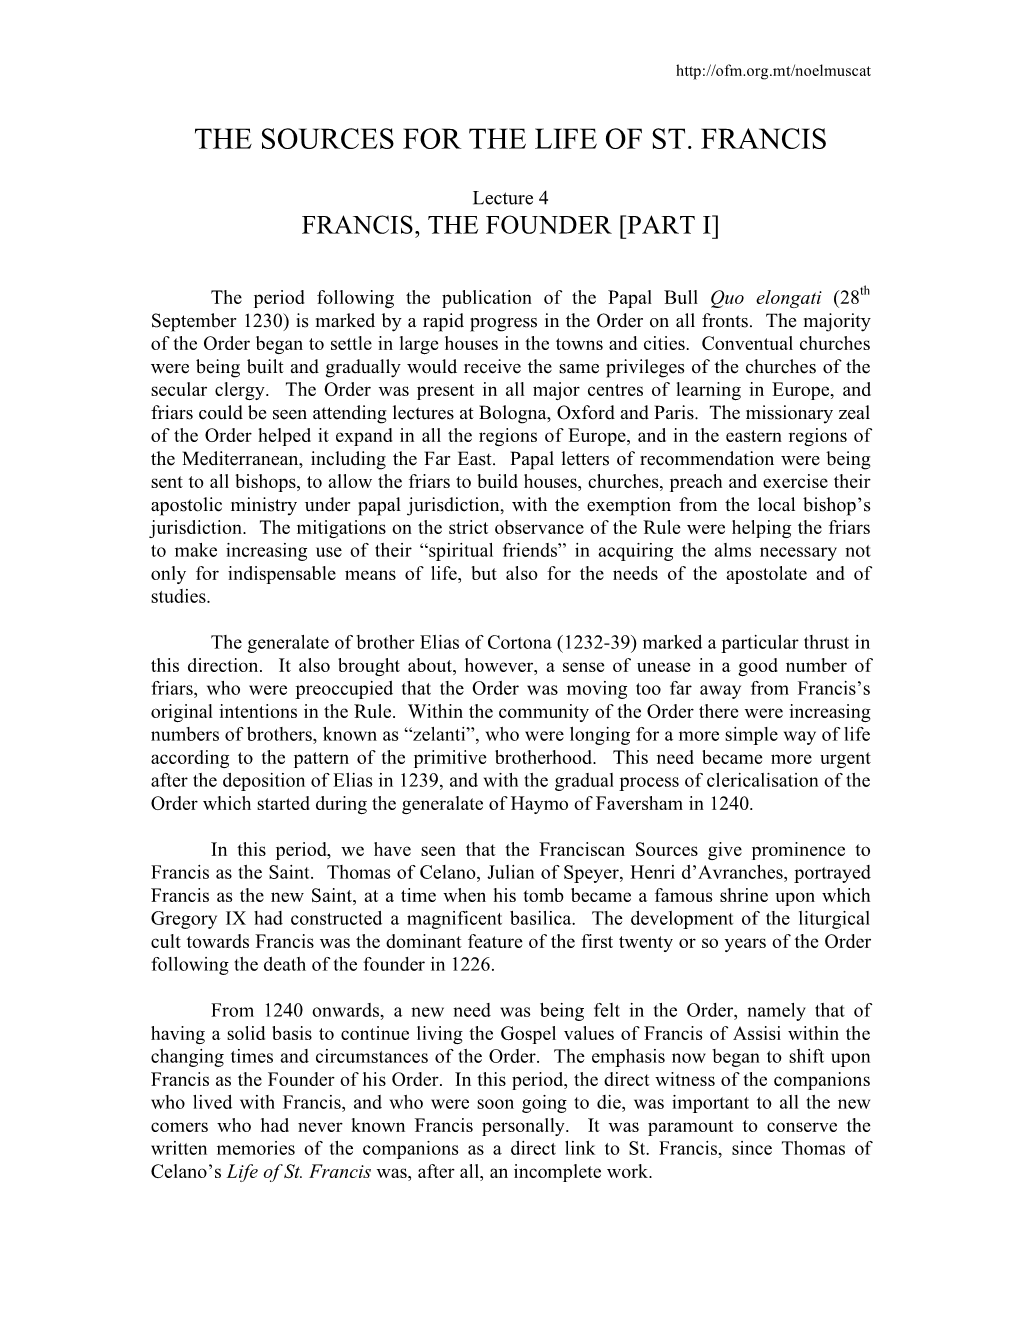 The Sources for the Life of St. Francis